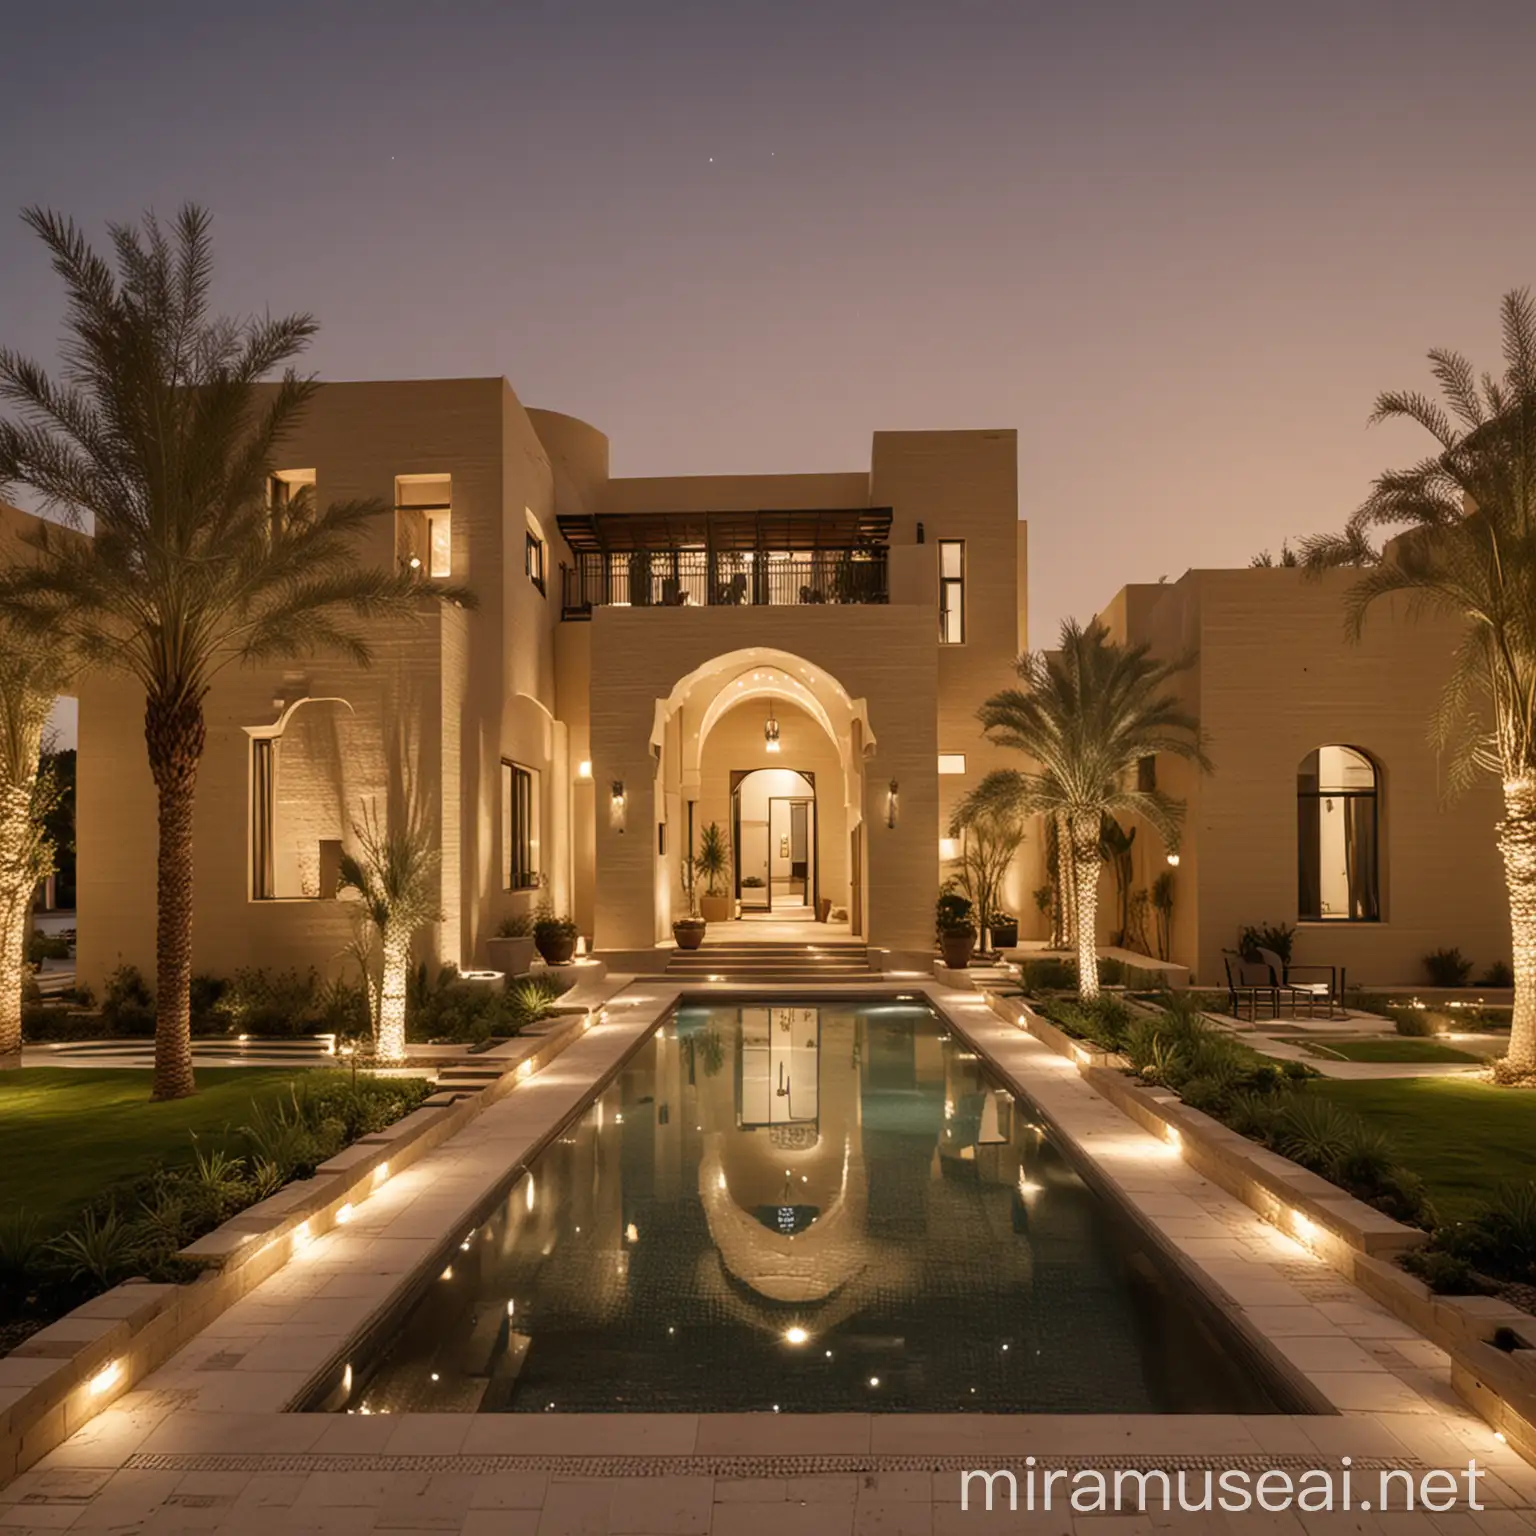 modern Arabien villa with Hedden lights around the windows the building is made of beige bricks and the landscape around it has green vegetation and the hardscape also beige color and their is a Hedden light in the landscape also add  water features at the landscape  and arabian lights 